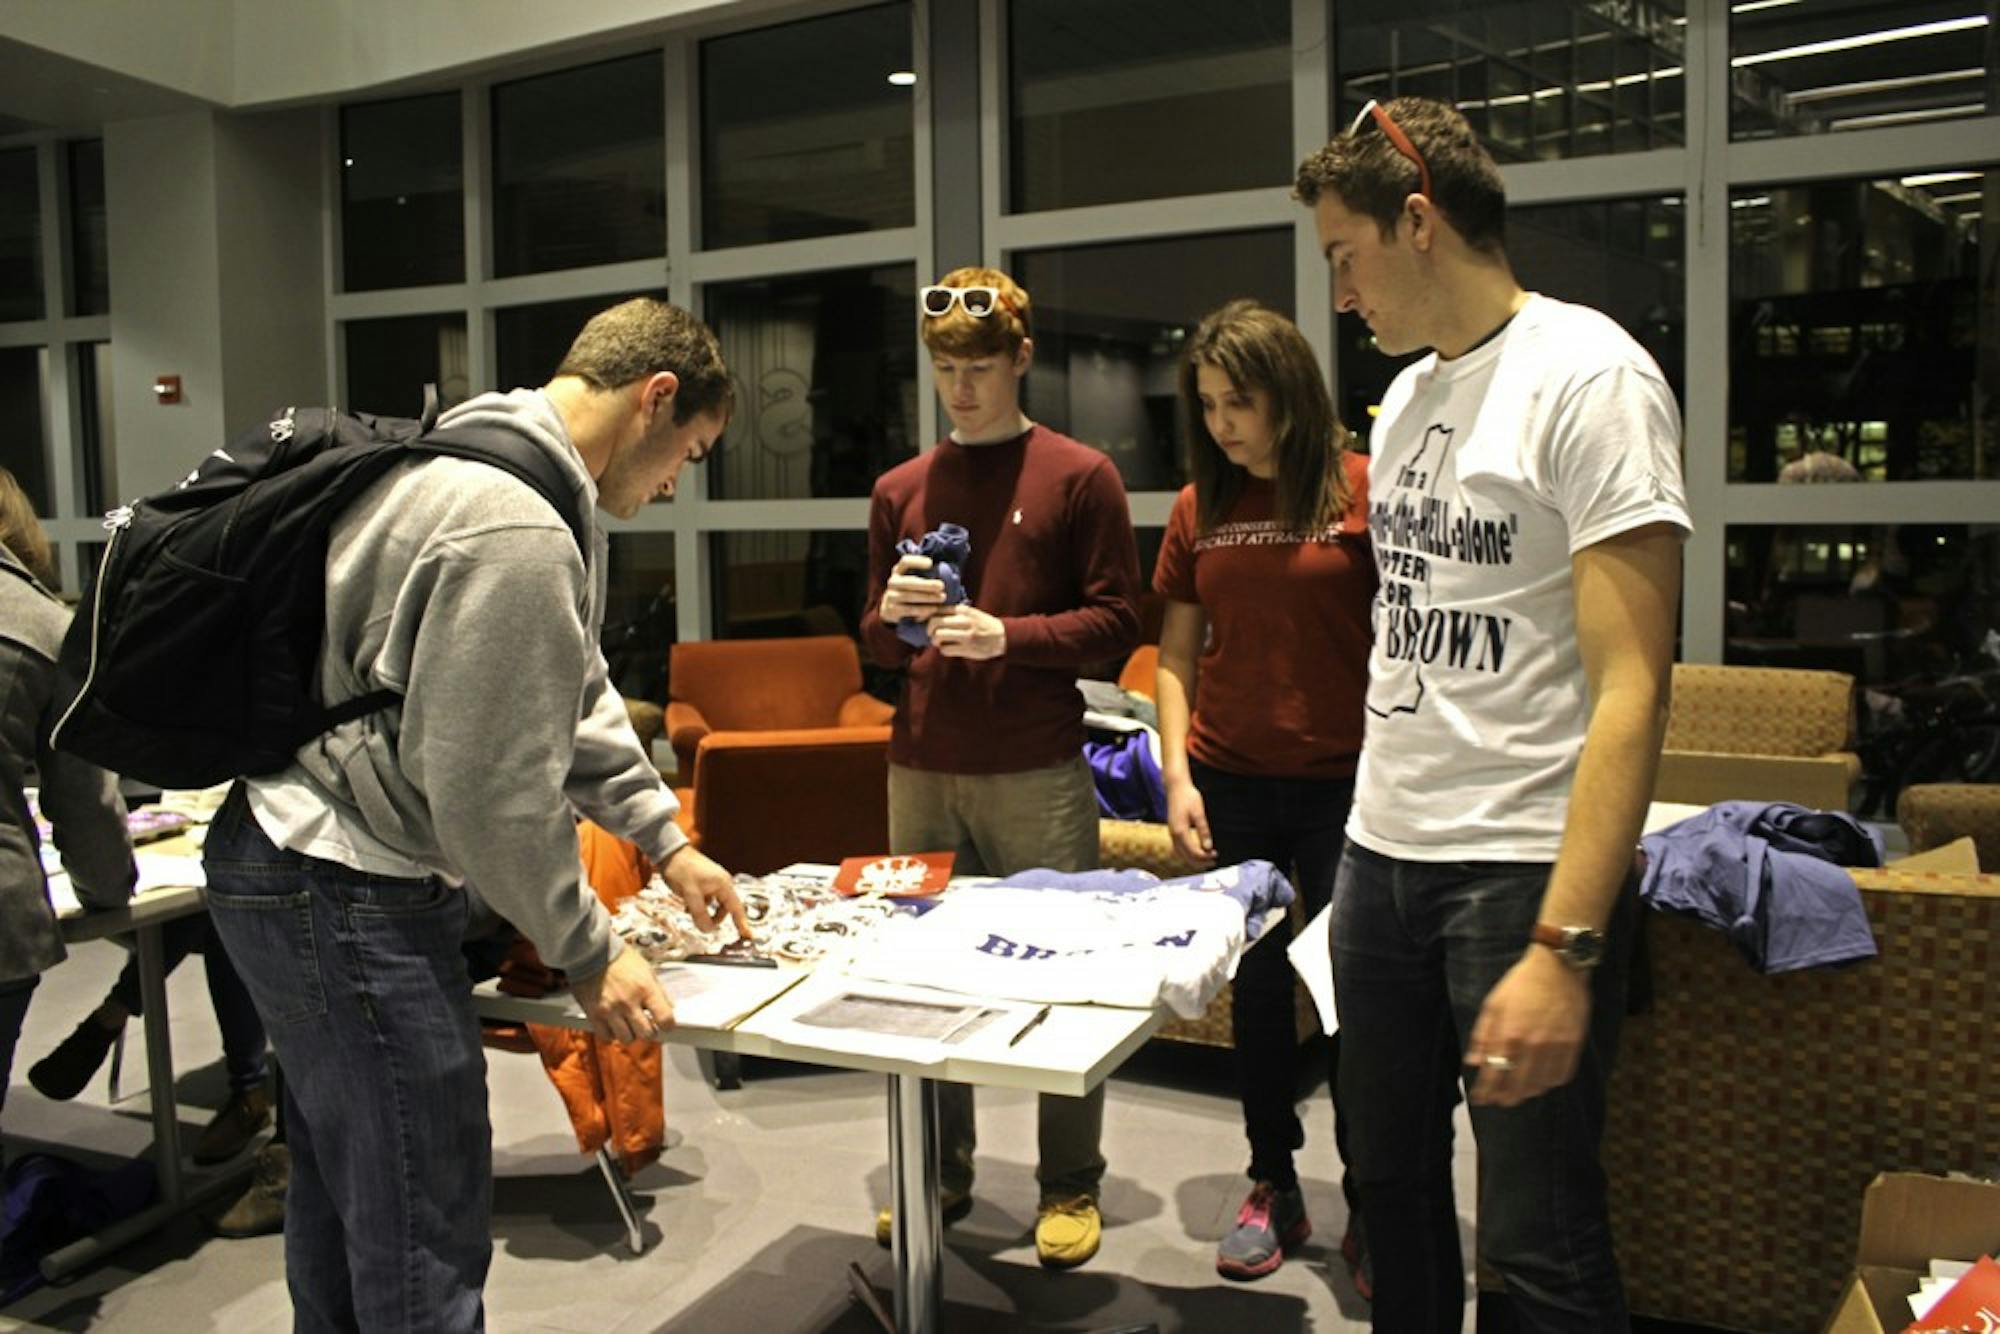 College Republicans tabled outside Novack on Thursday.